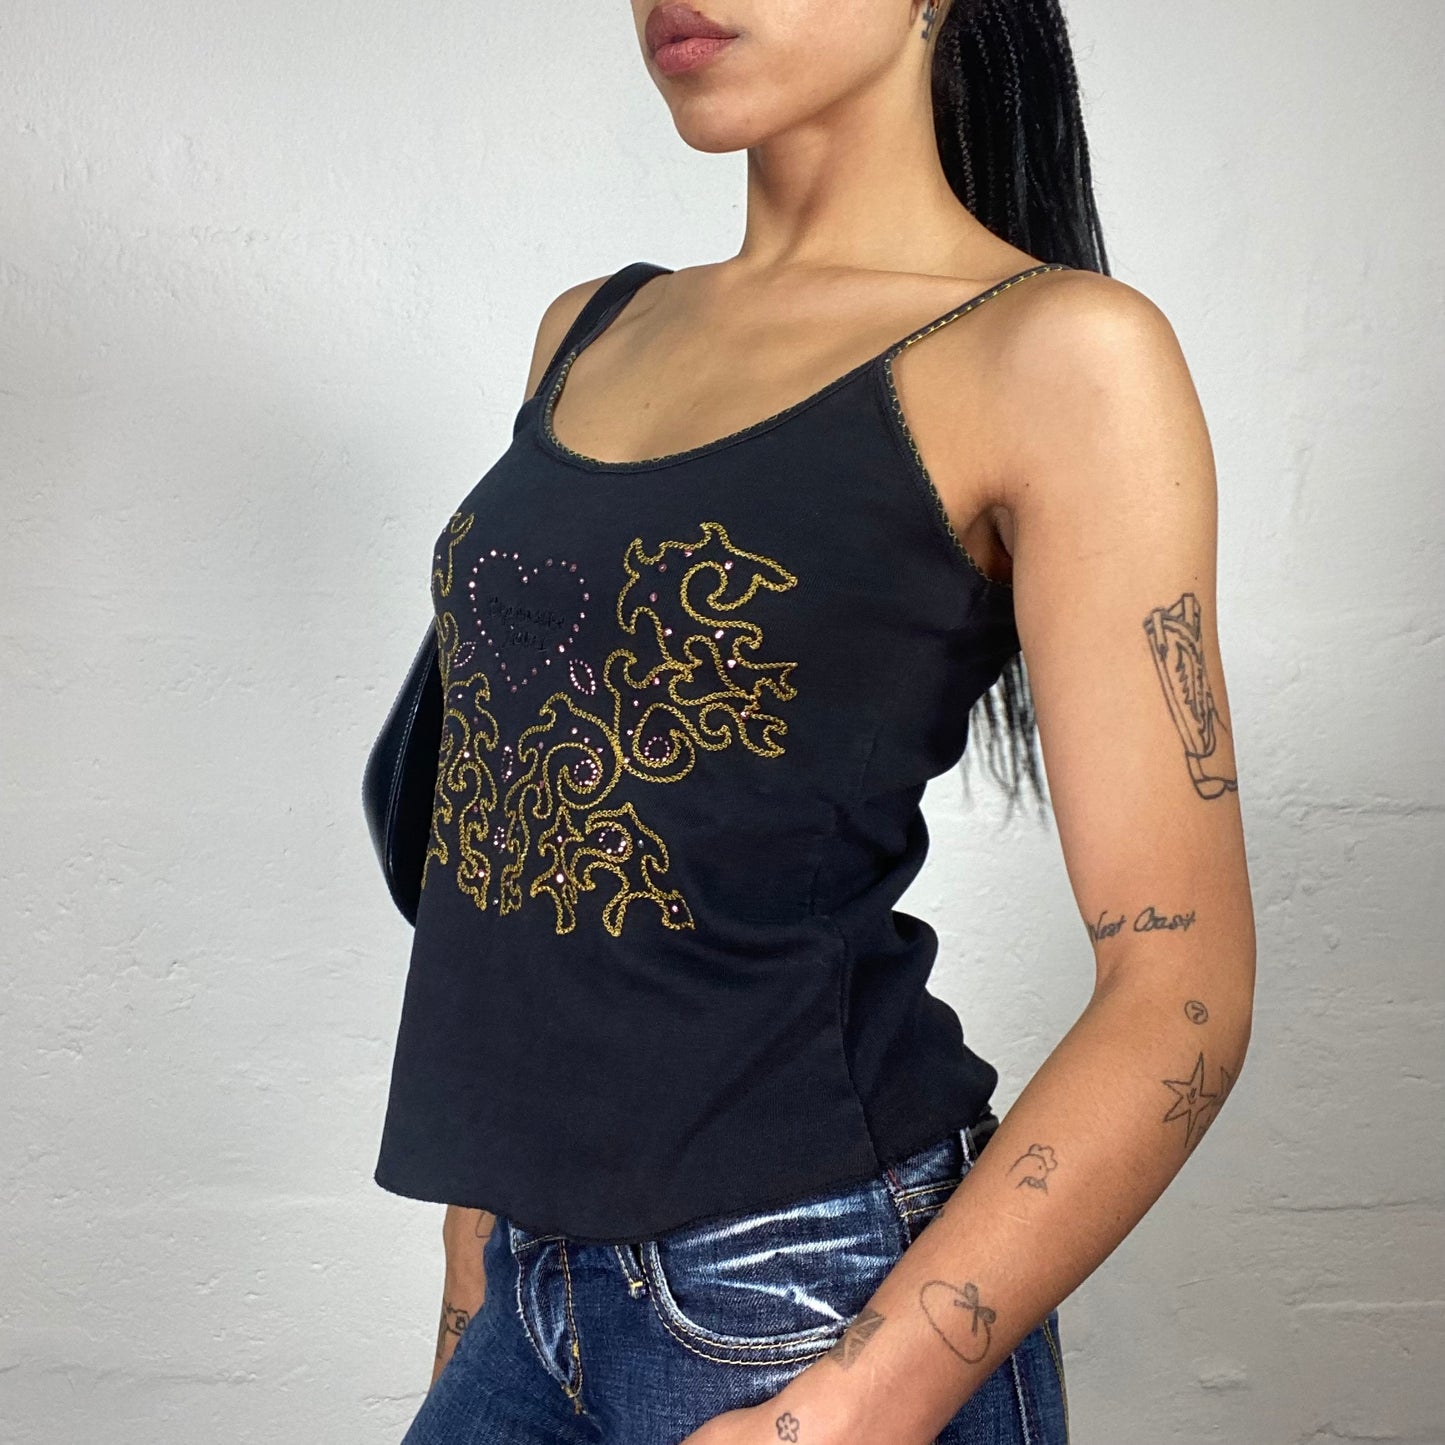 Vintage 2000's Downtown Girl Black Cami Top with Gold Abstract Print and Pink Rhinestone Heart Embroidery (L)